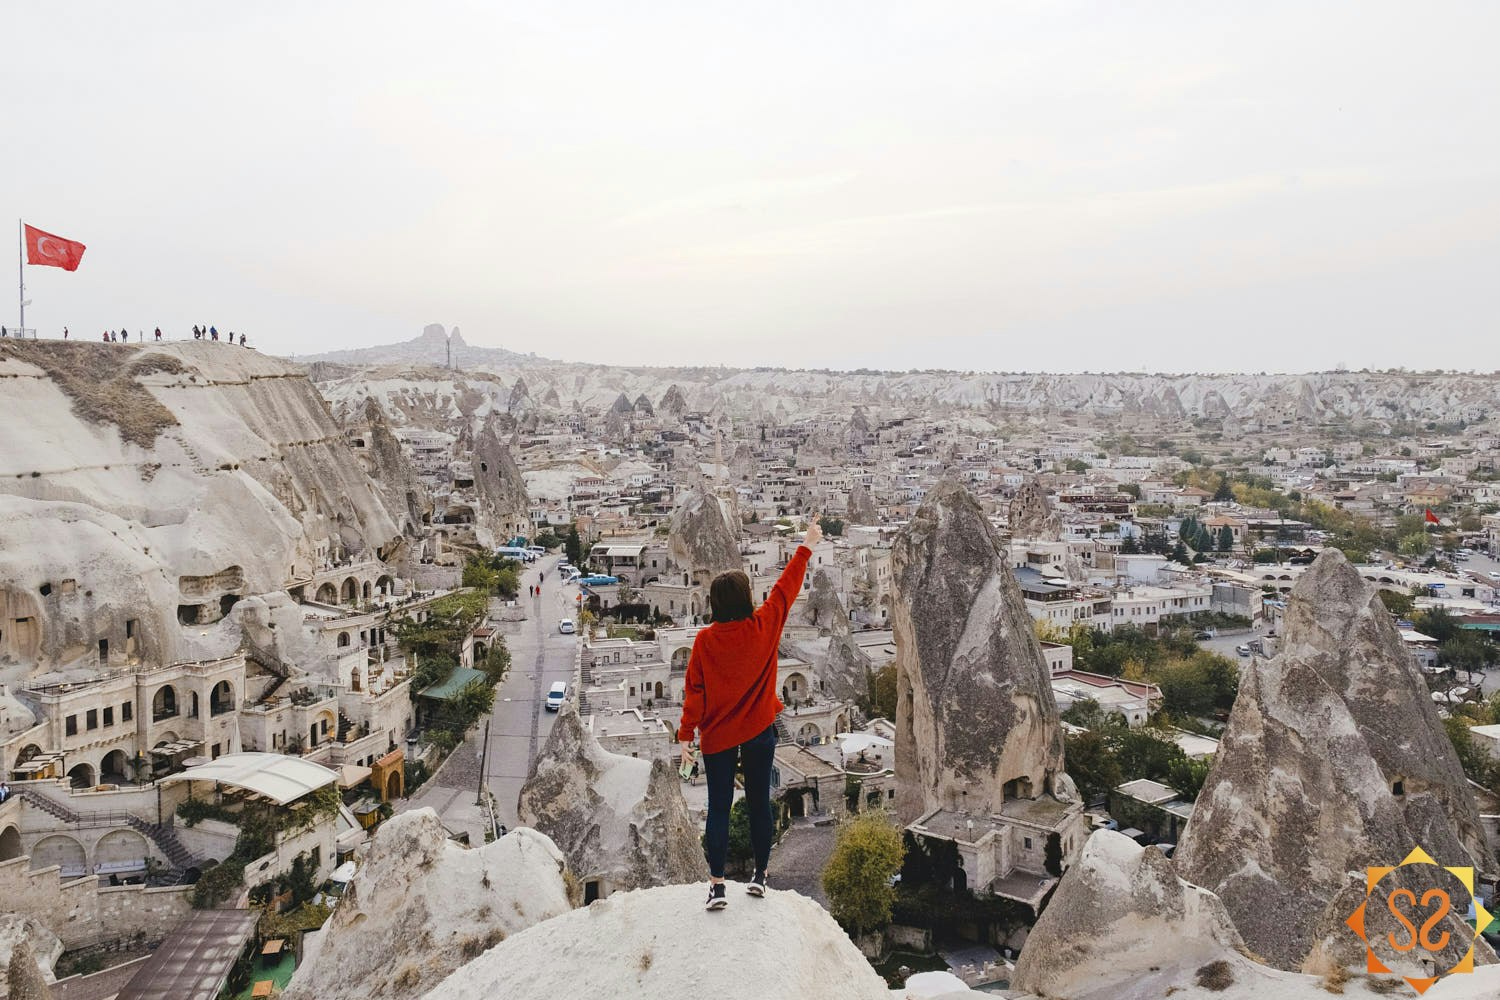 A person in a red jacket overlooking an old city in Turkey.